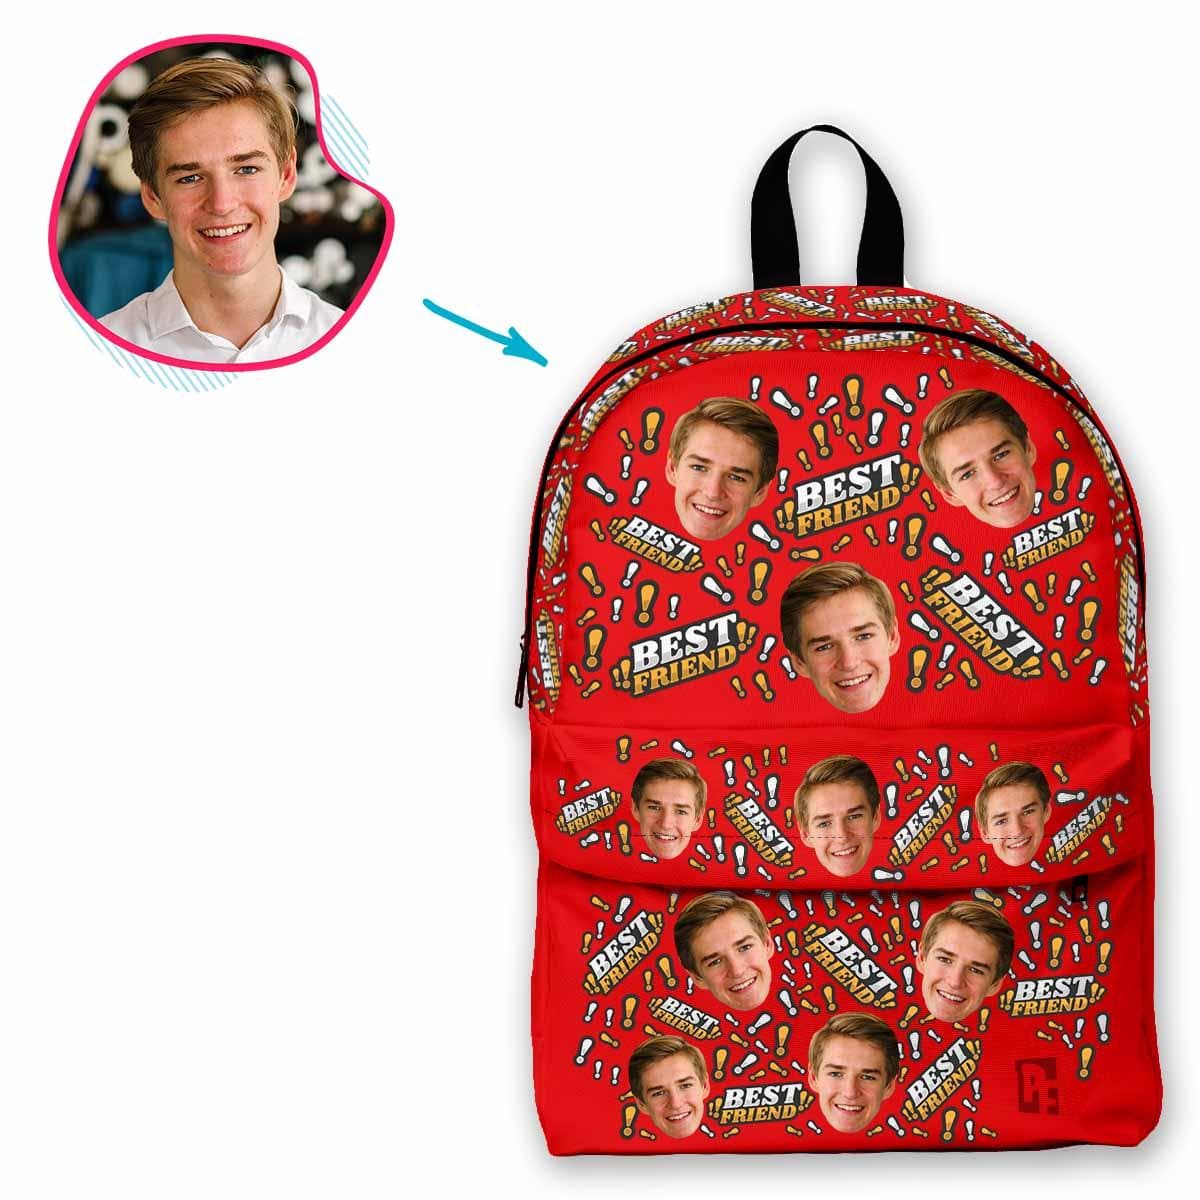 red Best Friend classic backpack personalized with photo of face printed on it